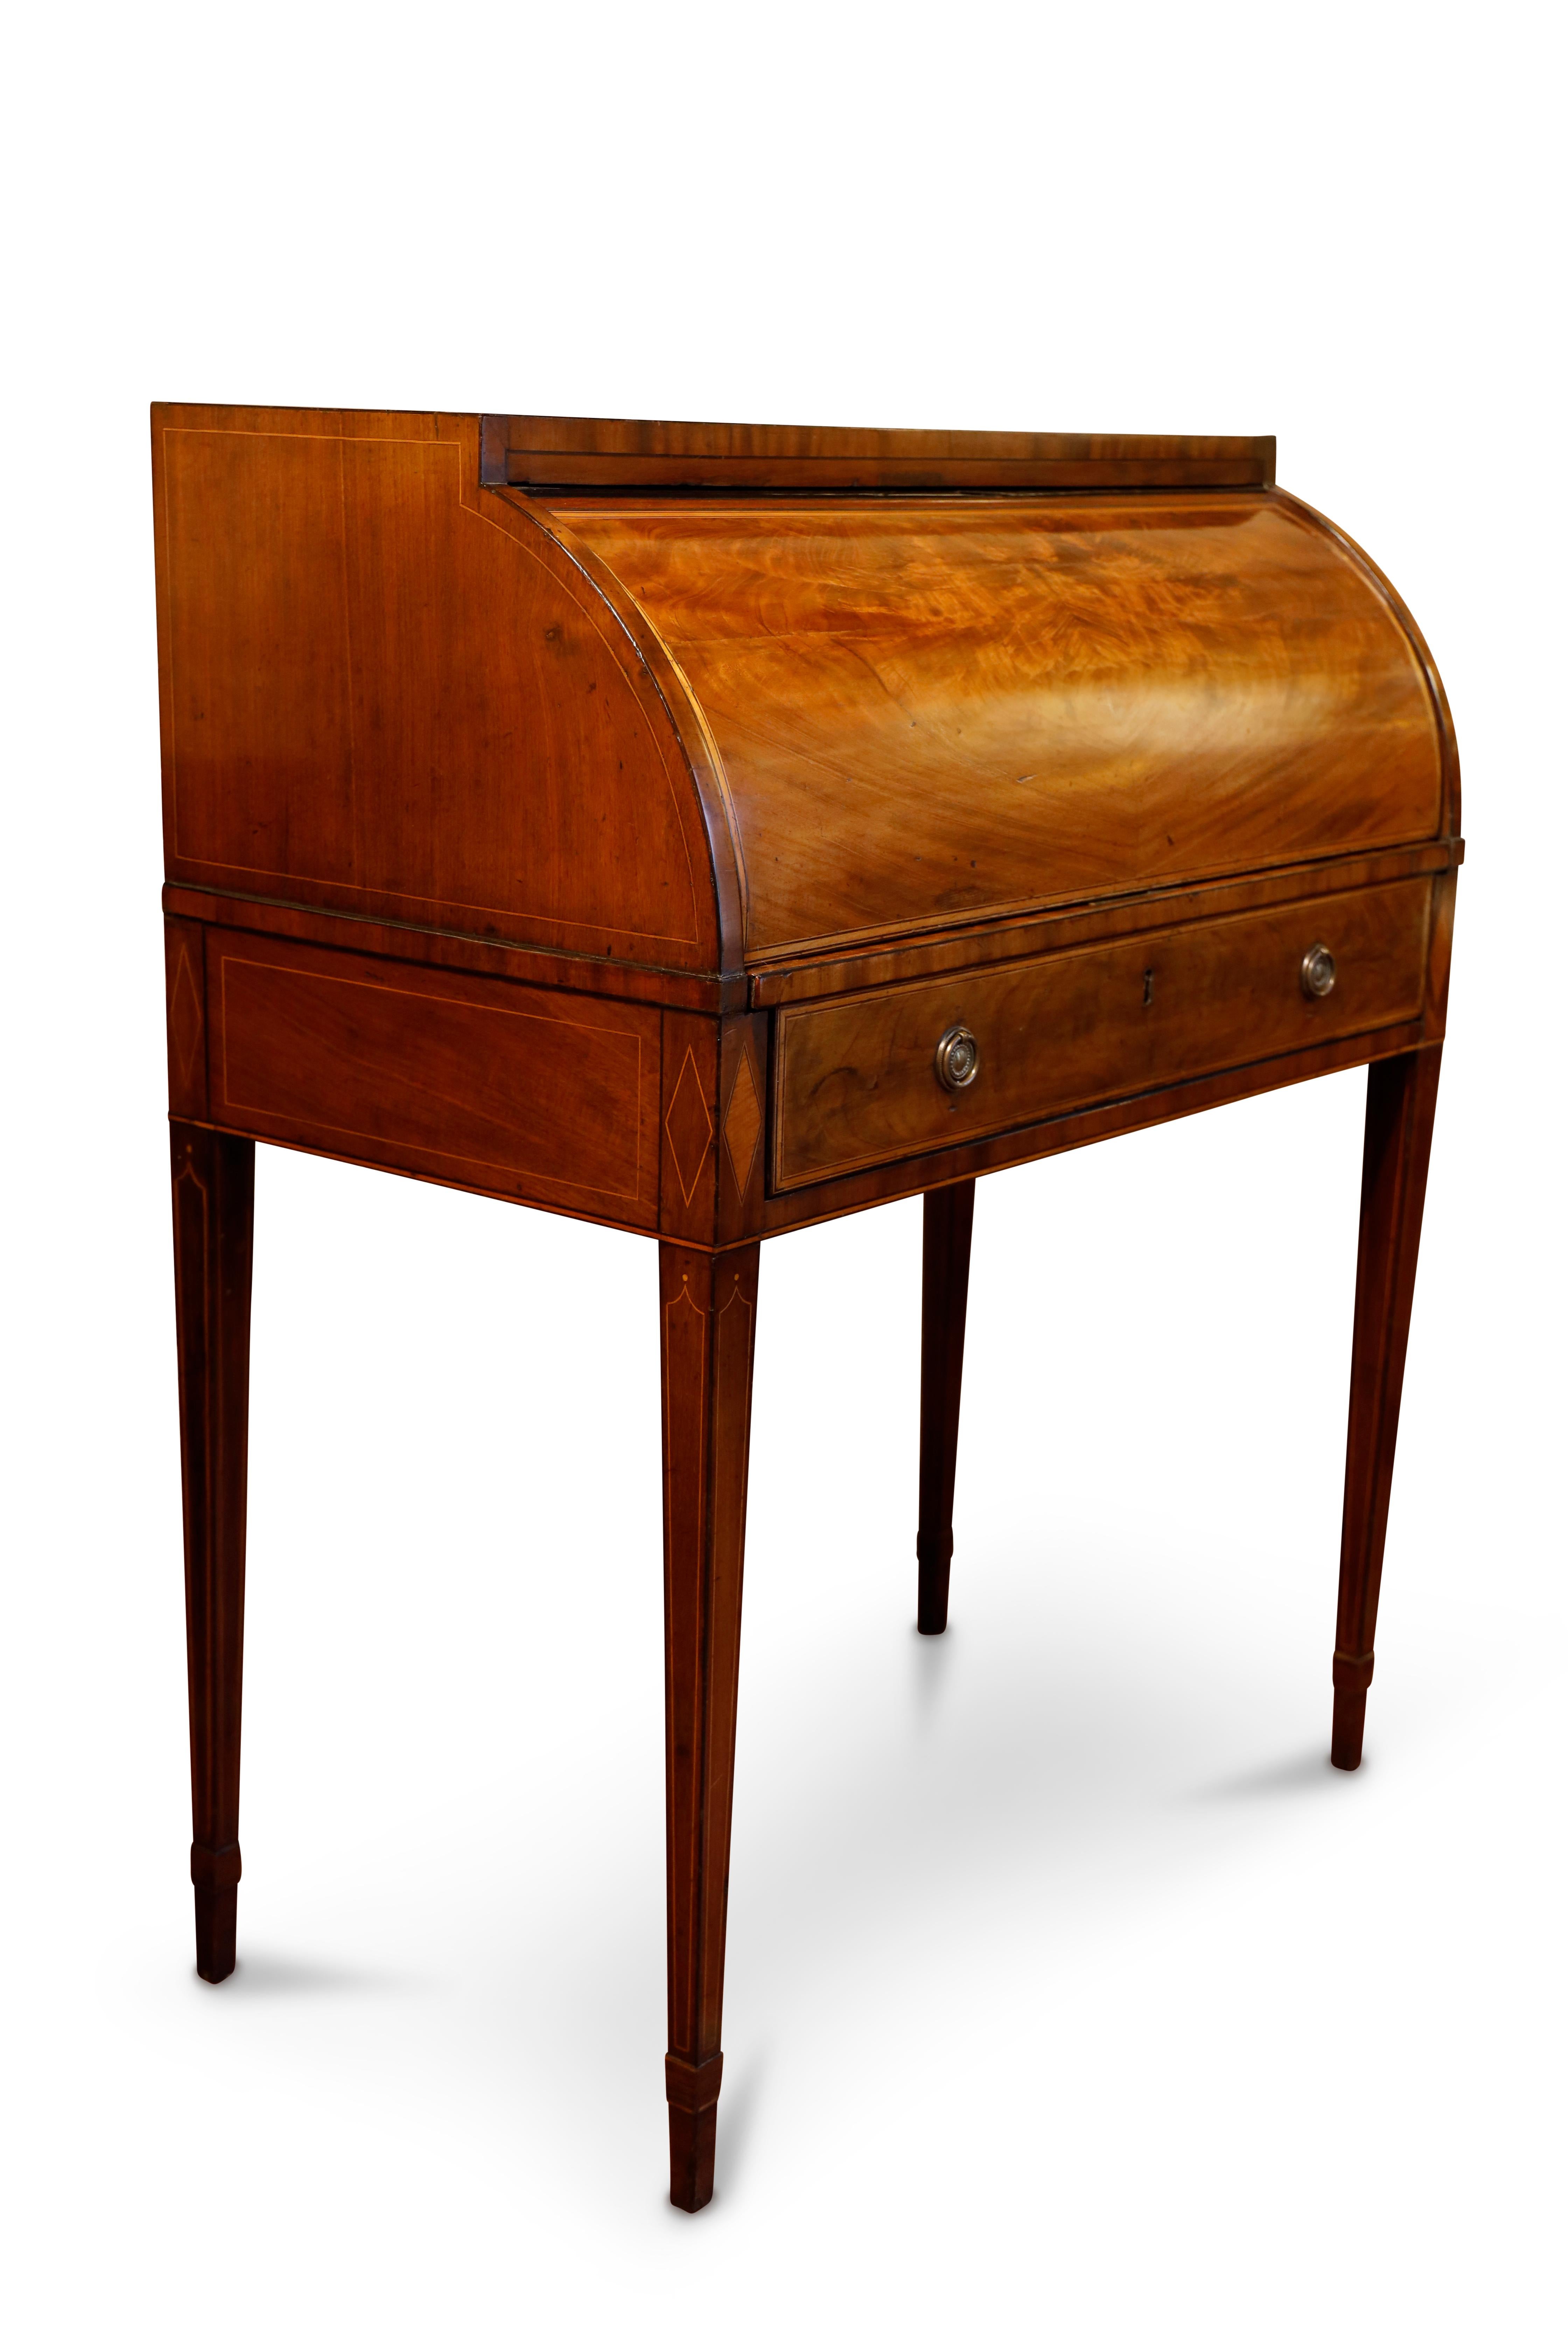 18th Century Scottish, George III Mahogany and Sycamore Banded Cylinder Bureau For Sale